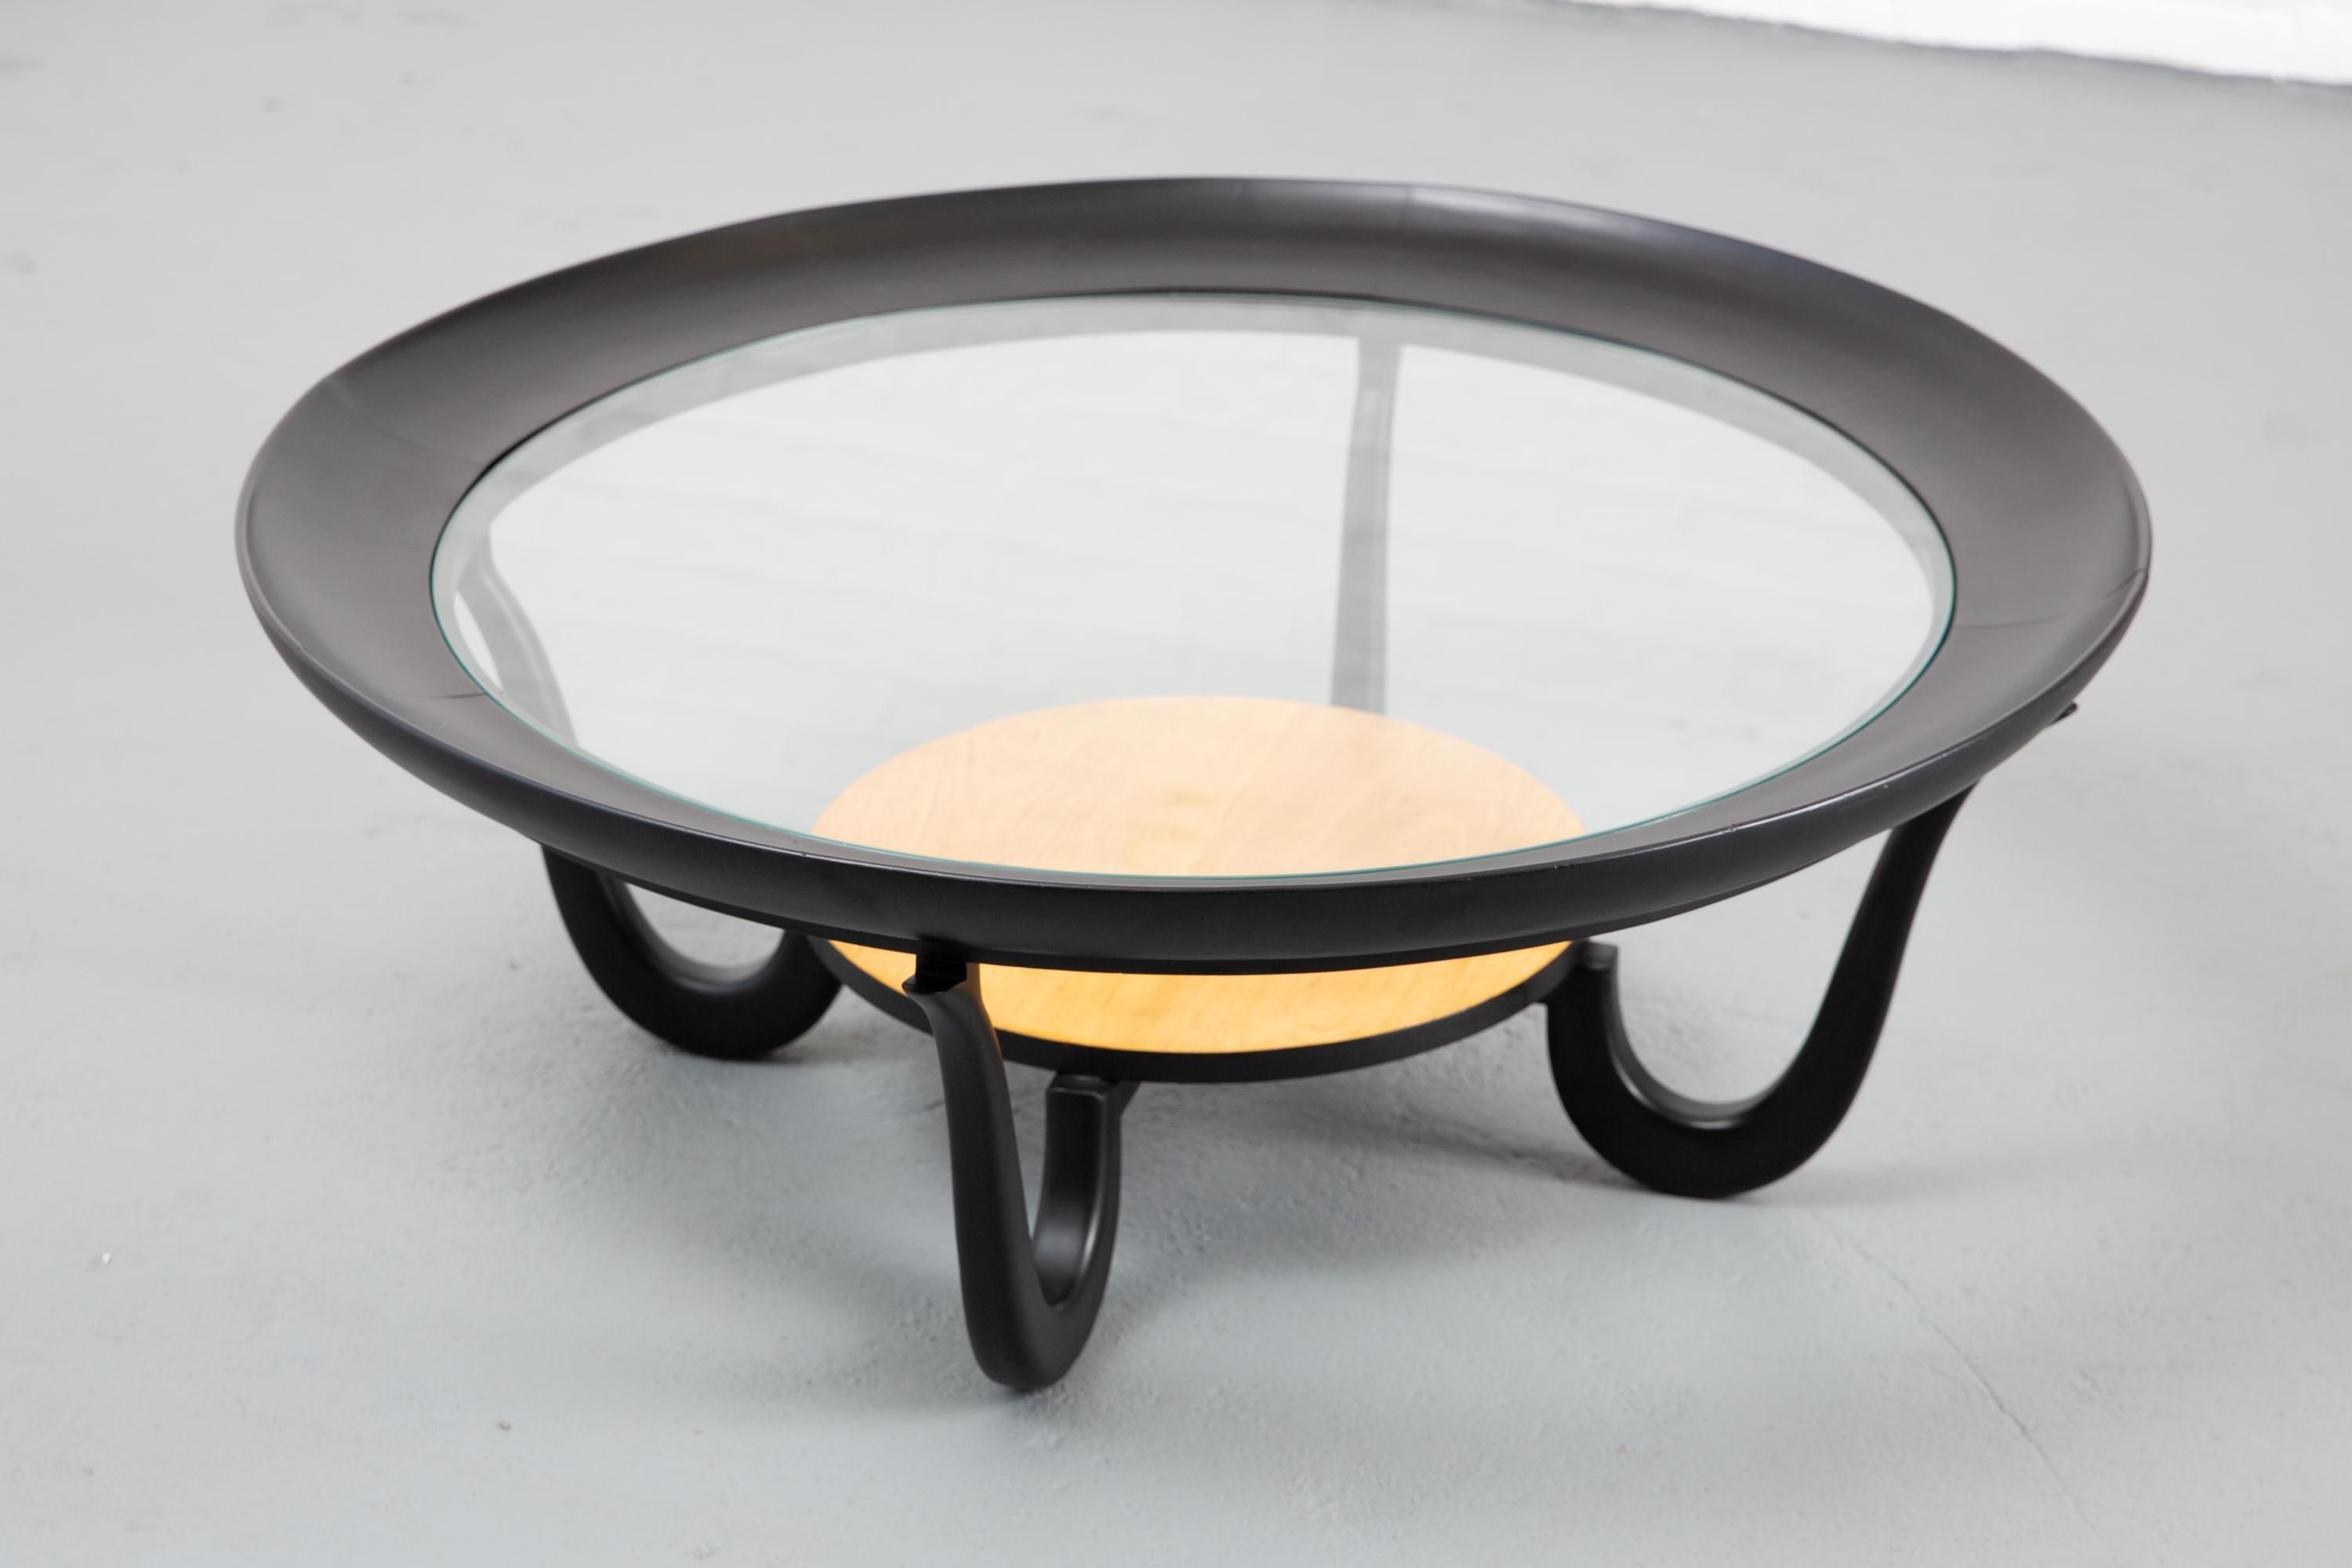 1950's round ebonized Giuseppe Scapinelli cofffee table with glass top and natural wood raised lower shelf. Beautiful curved 